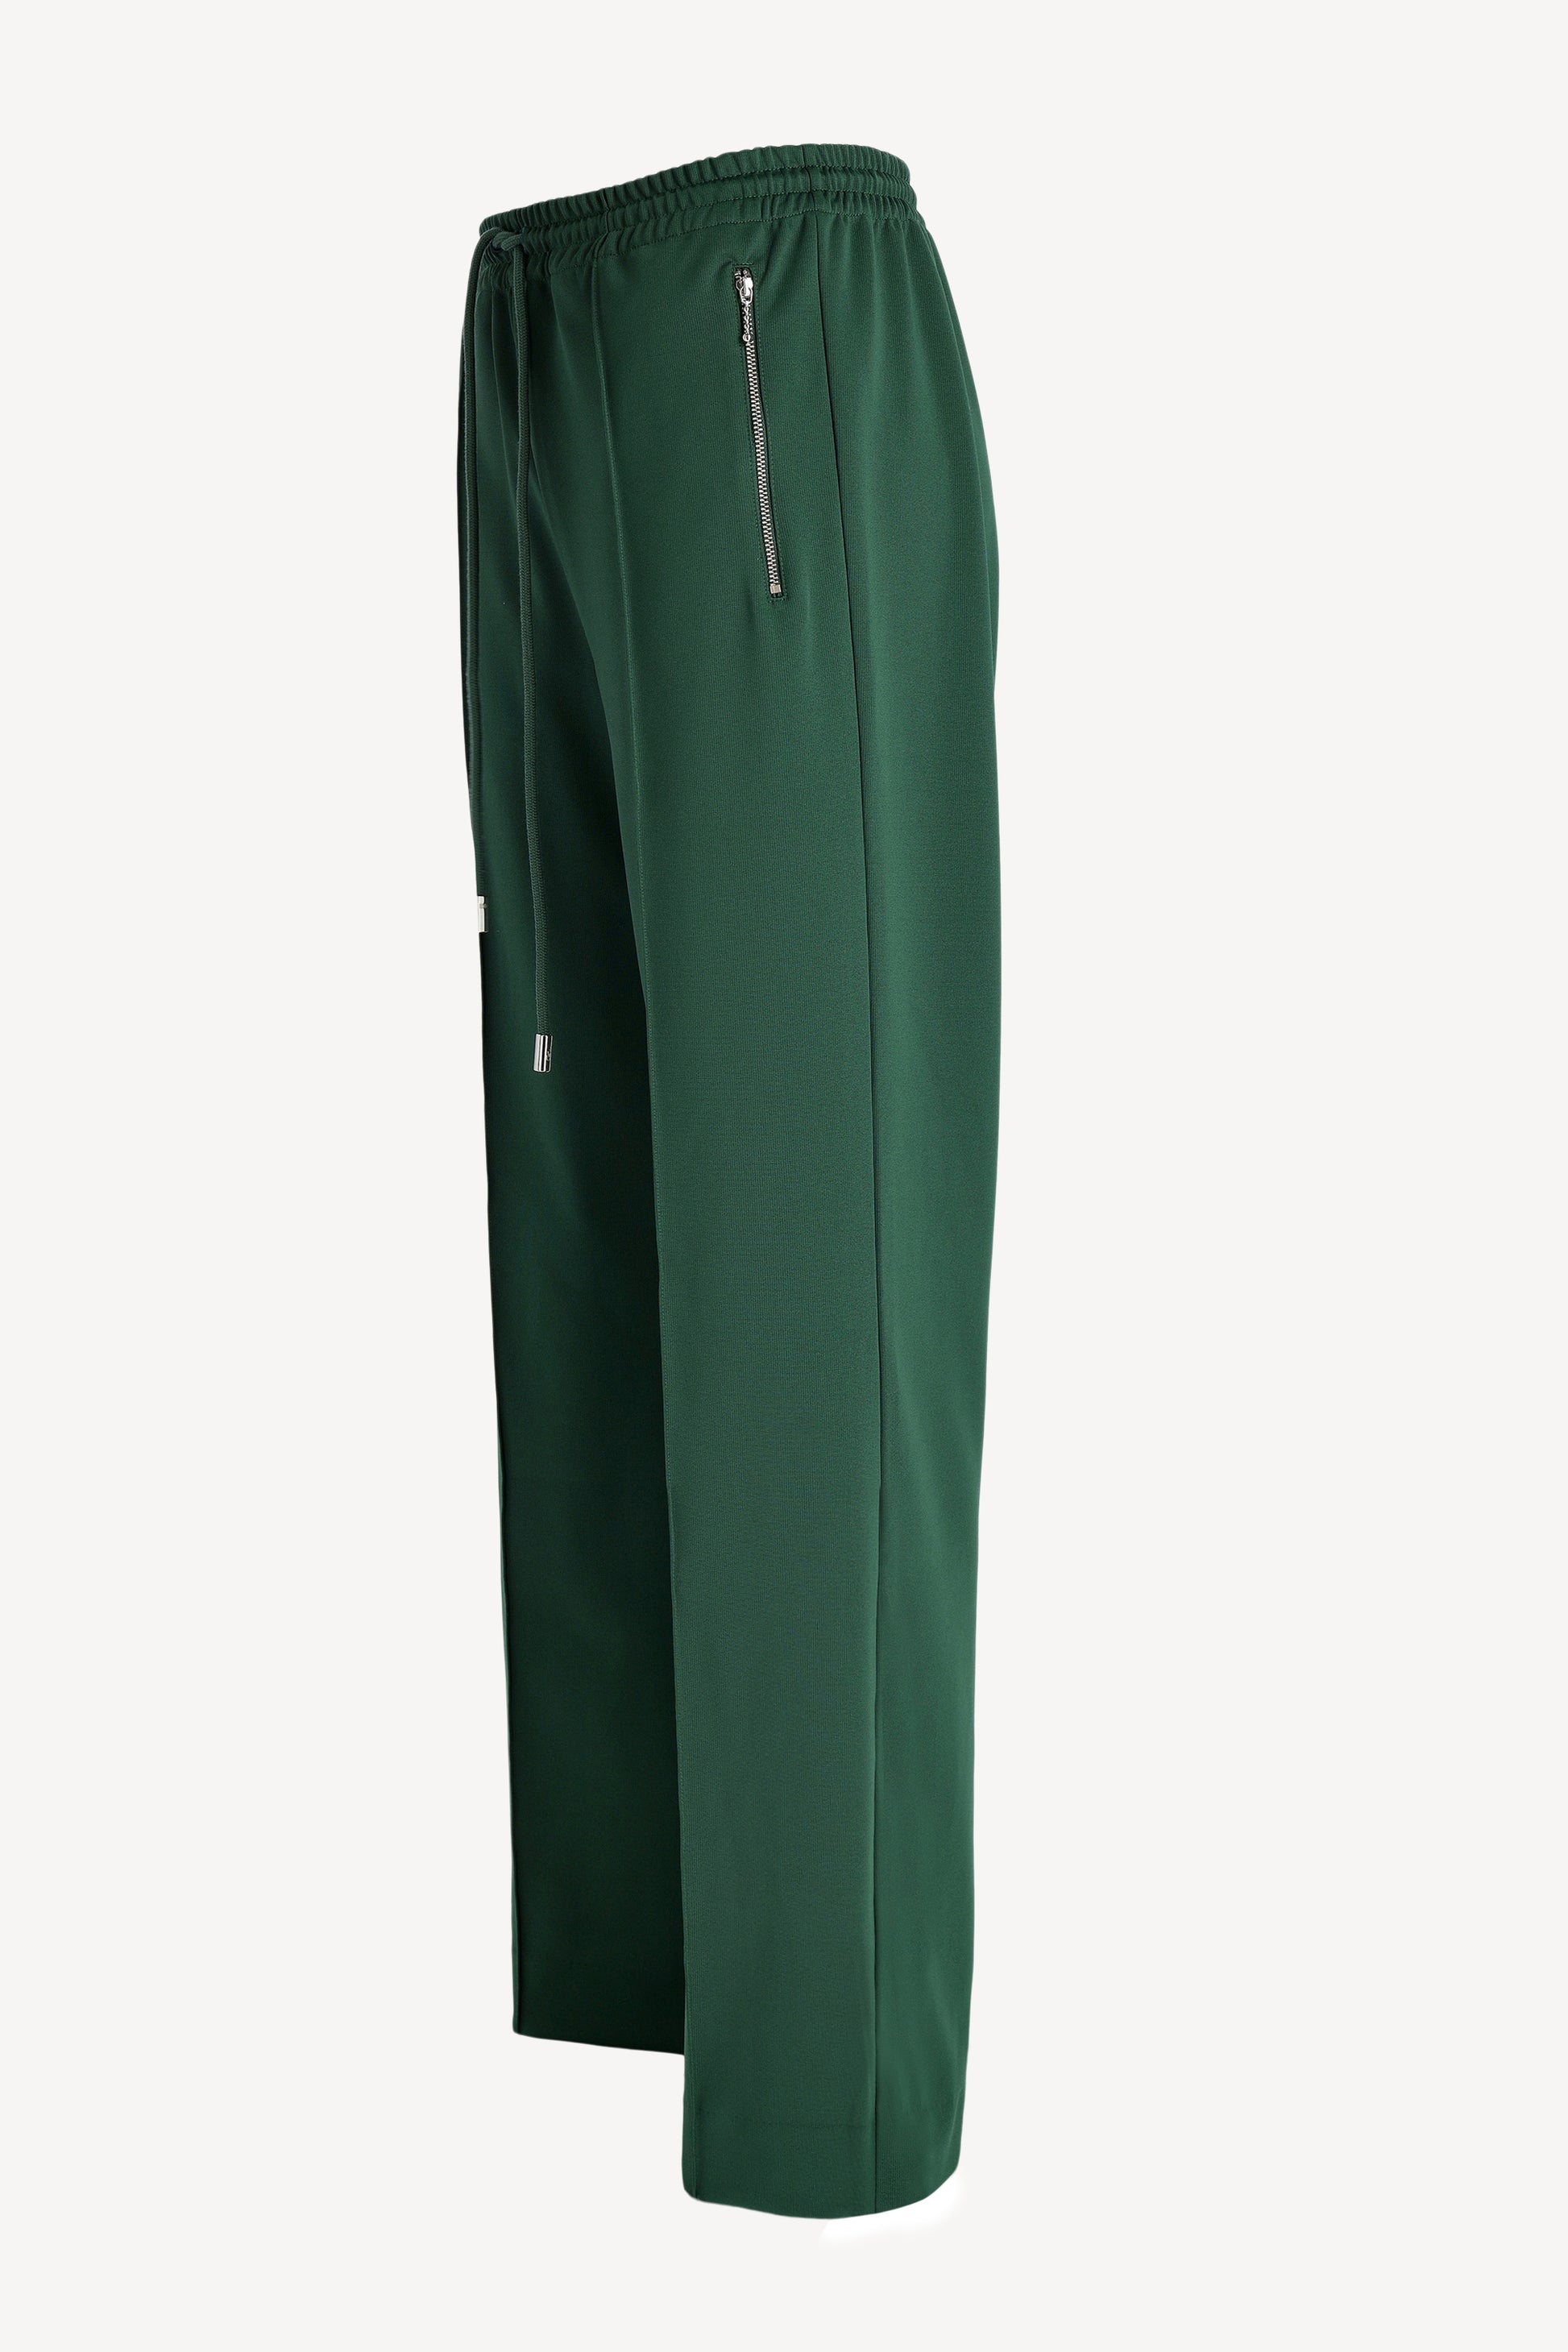 Trackpants Bootcut in Racing GreenJW Anderson - Anita Hass